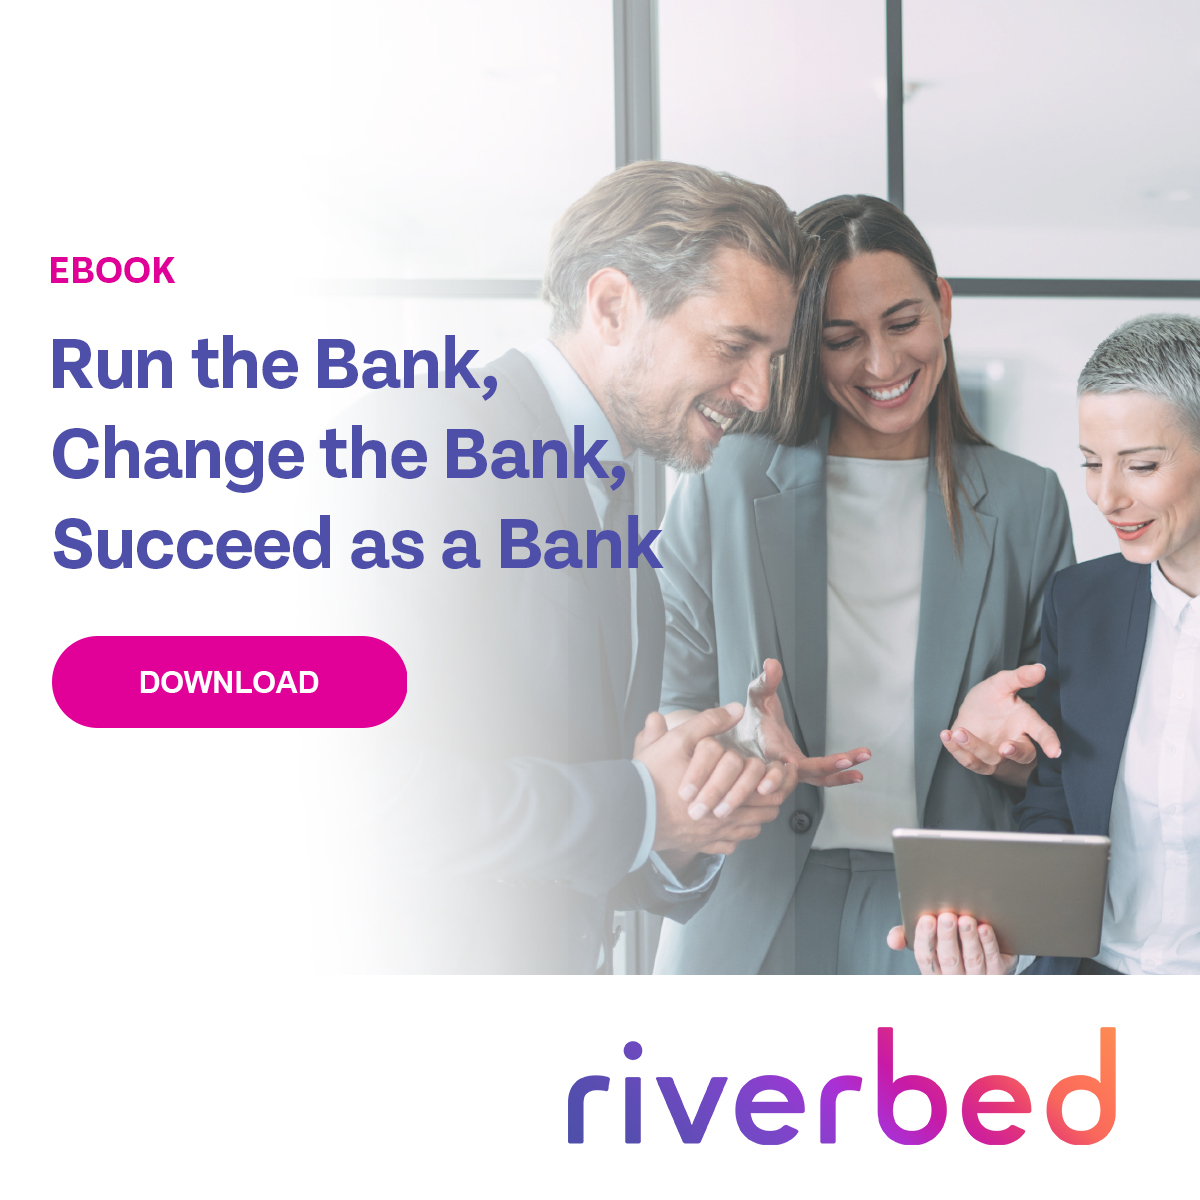 On average, digital banking teams only have full #observability into 11% of their IT environment. 😳 Limited visibility can hinder your bank’s #digitaltransformation efforts, impacting revenue & customer relationships. Read how #UnifiedObservability helps: rvbd.ly/4aMREnI